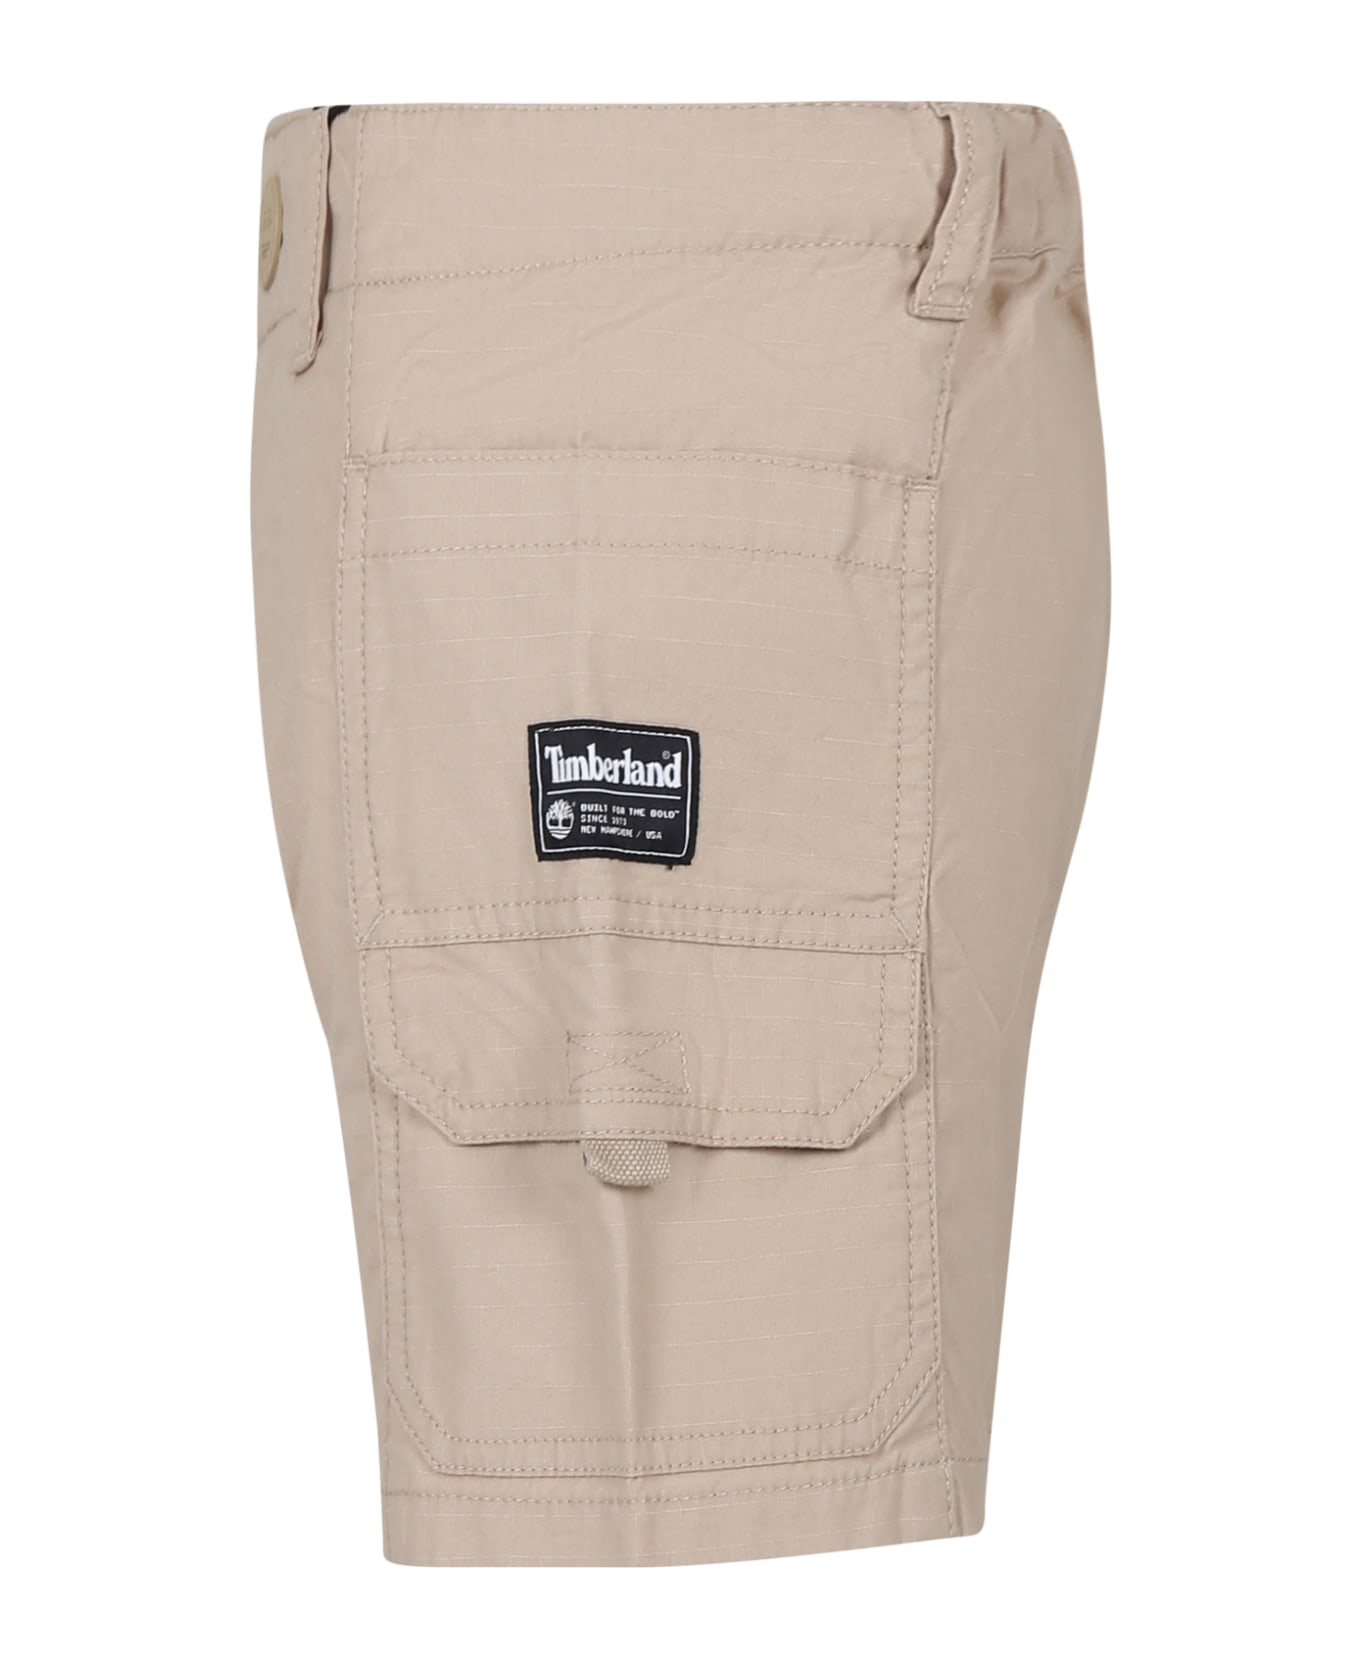 Timberland Beige Casual Shorts For Boy - Beige